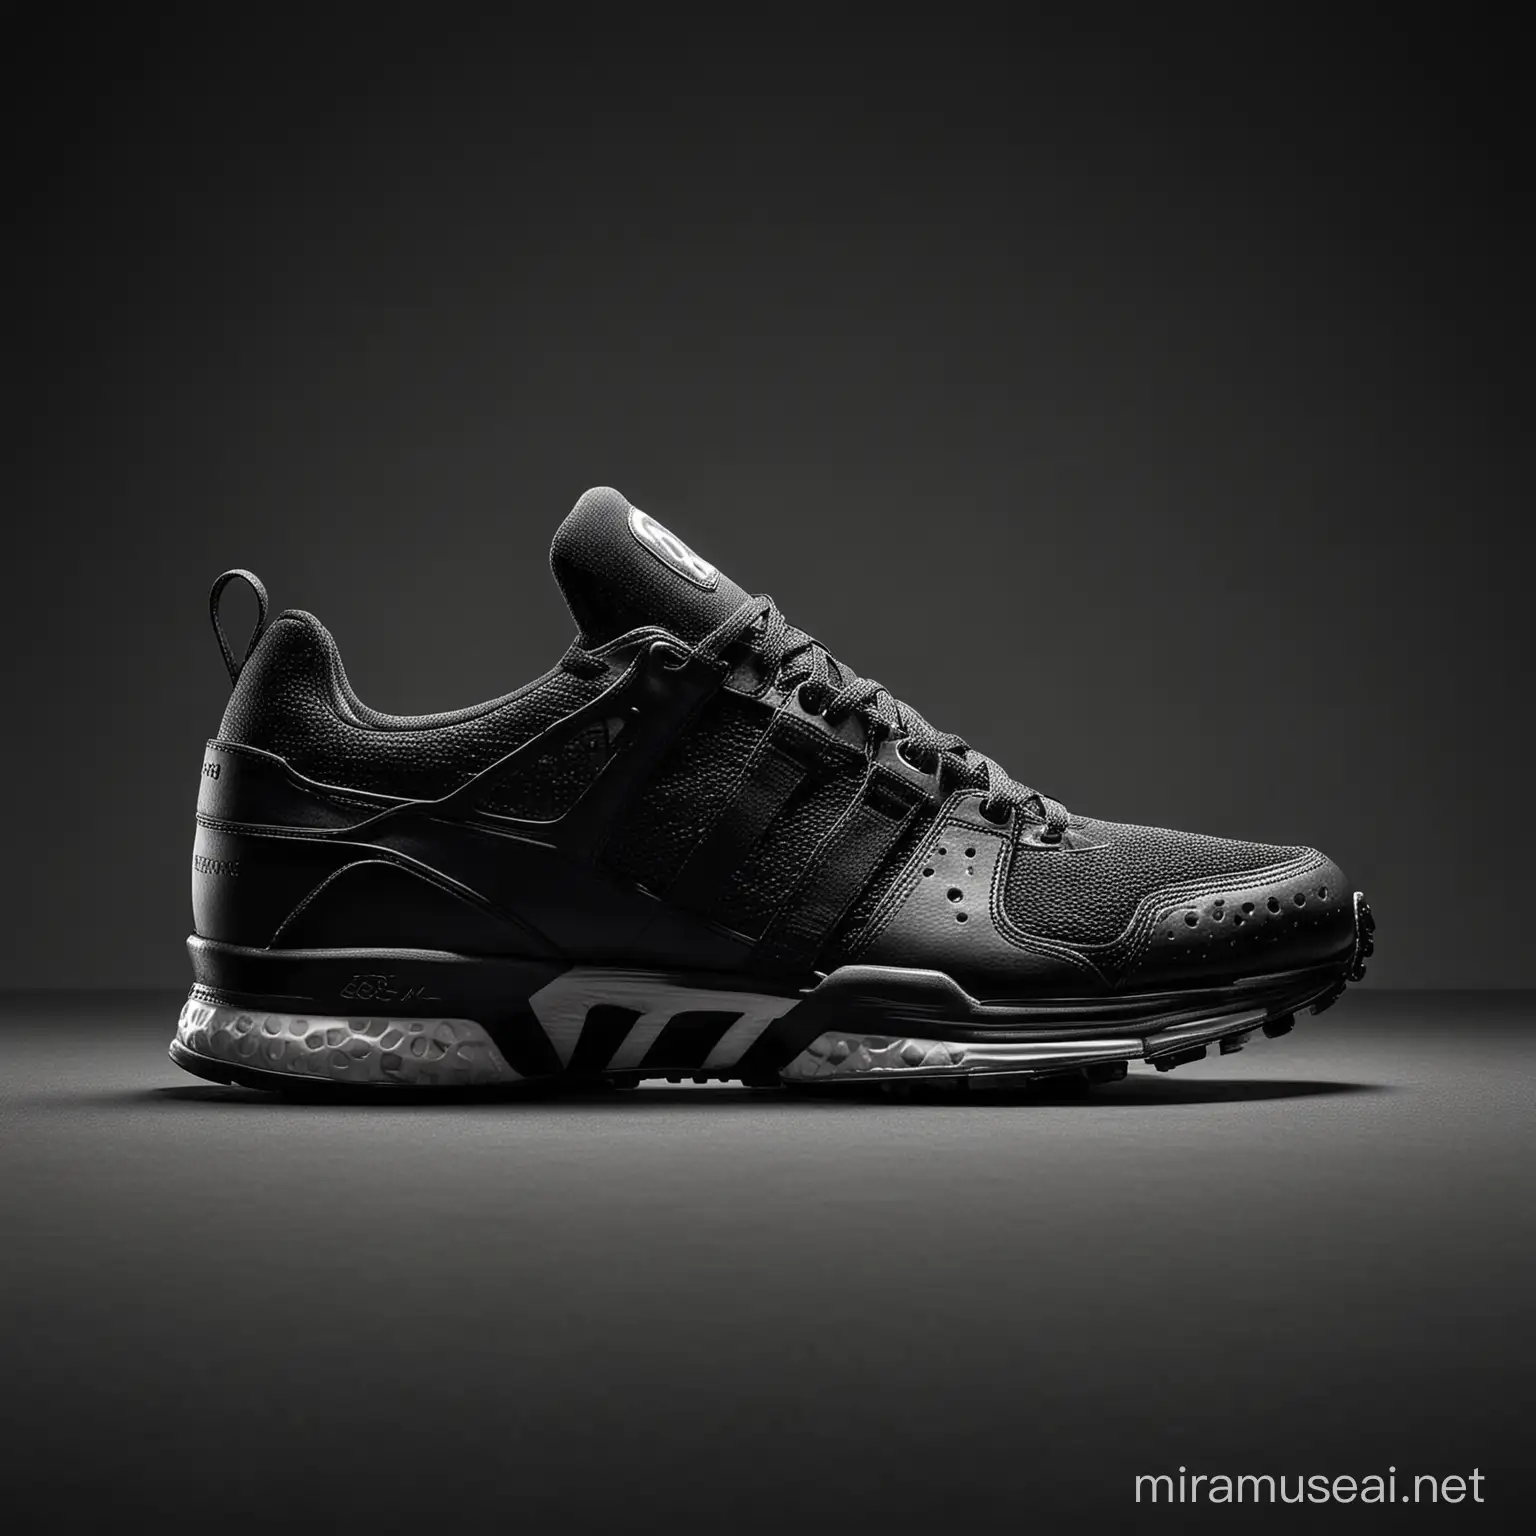 Athletic Performance Sport Shoes on a Dark Background